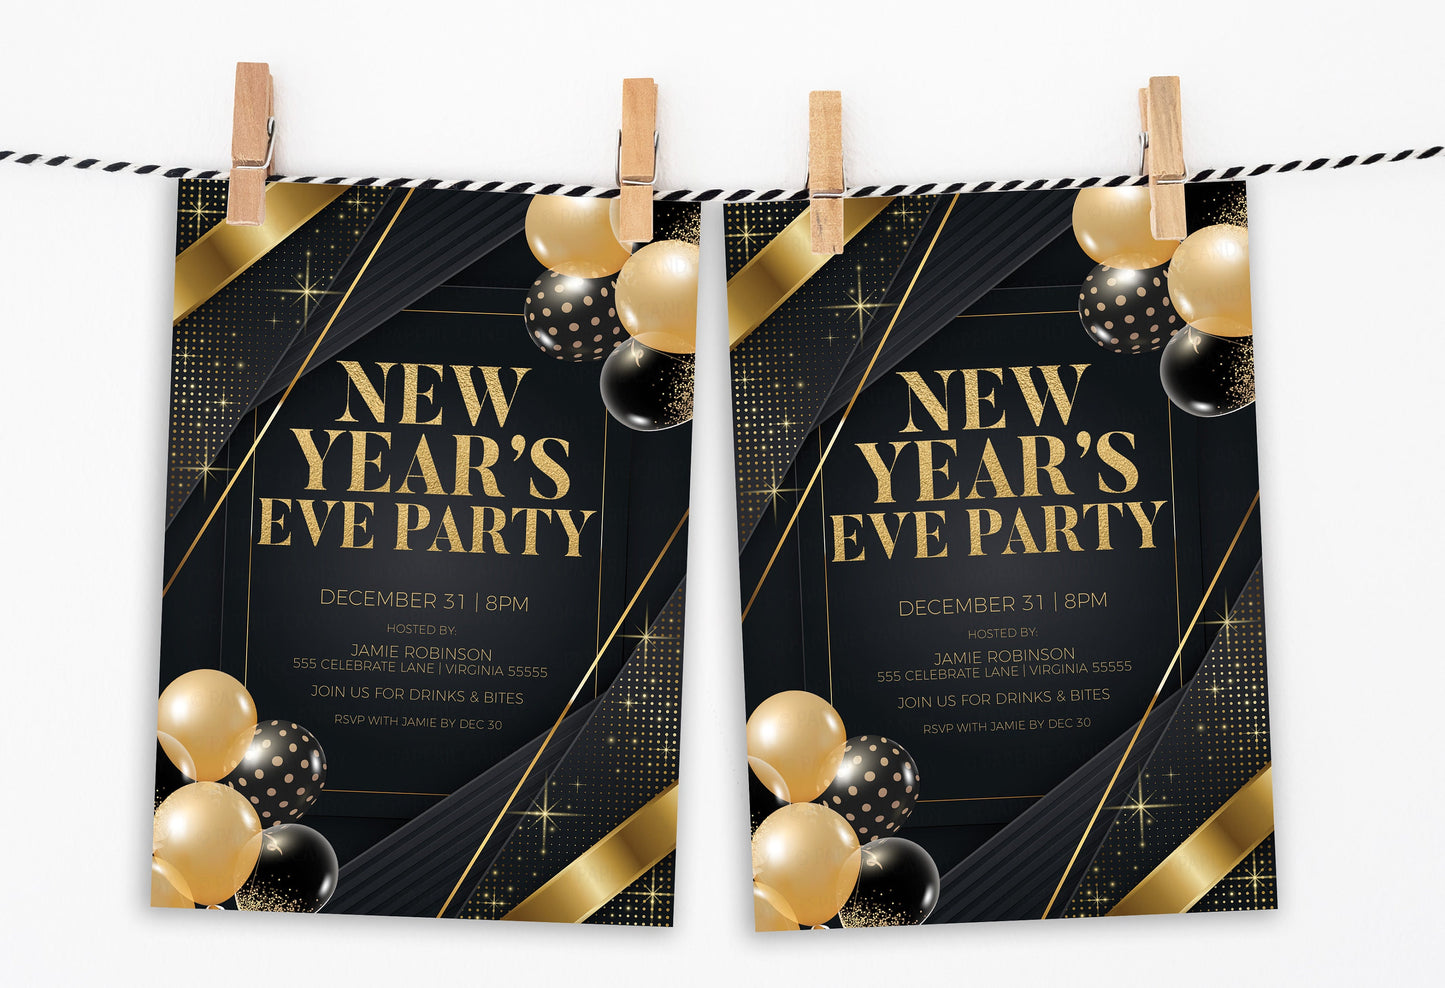 New Year's Eve Party Invitation, New Years Celebration Invite, Ball Drop Party, New Year Party, New Years Eve Dinner Drinks, Printable